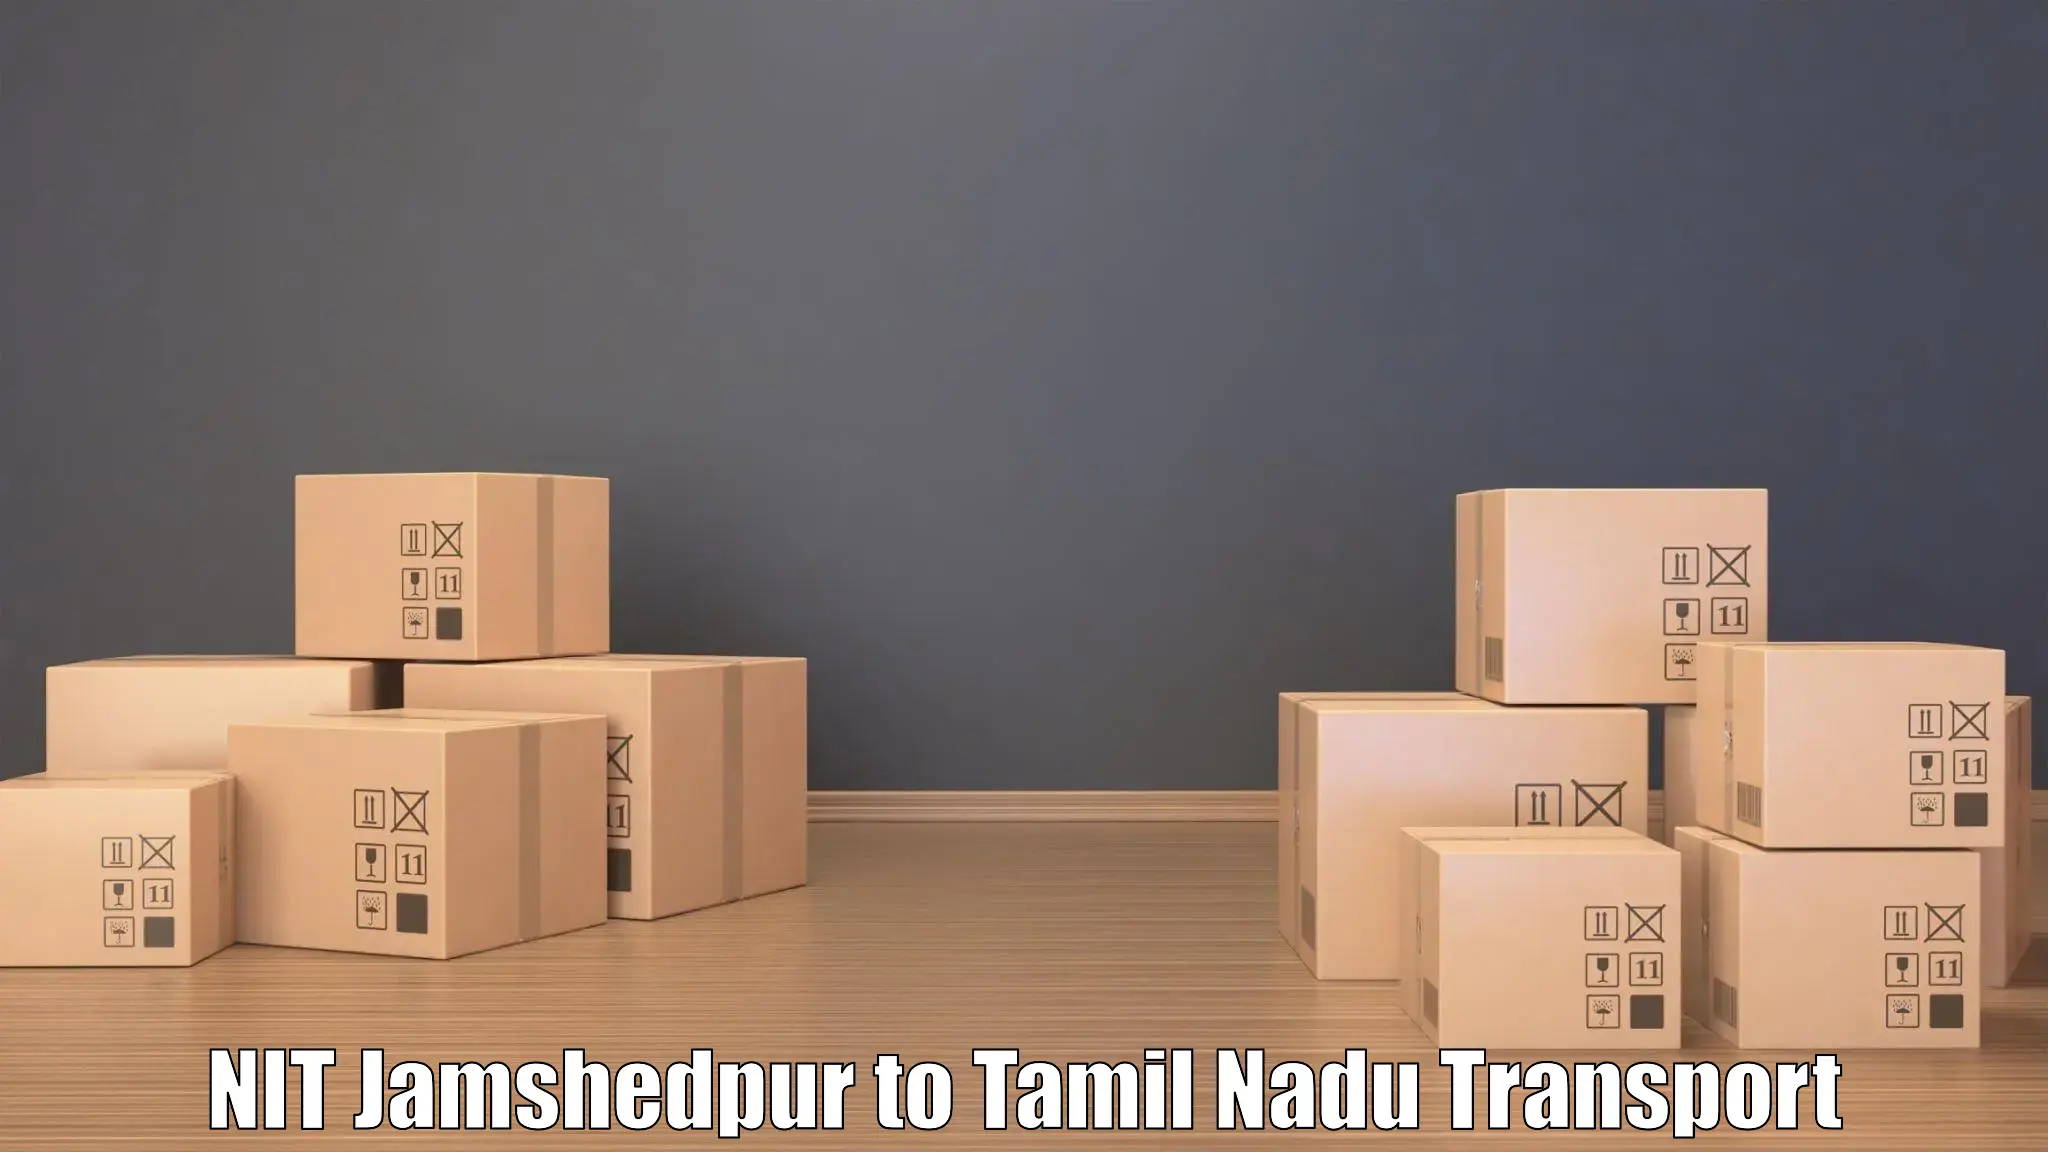 Container transportation services NIT Jamshedpur to Shanmugha Arts Science Technology and Research Academy Thanjavur